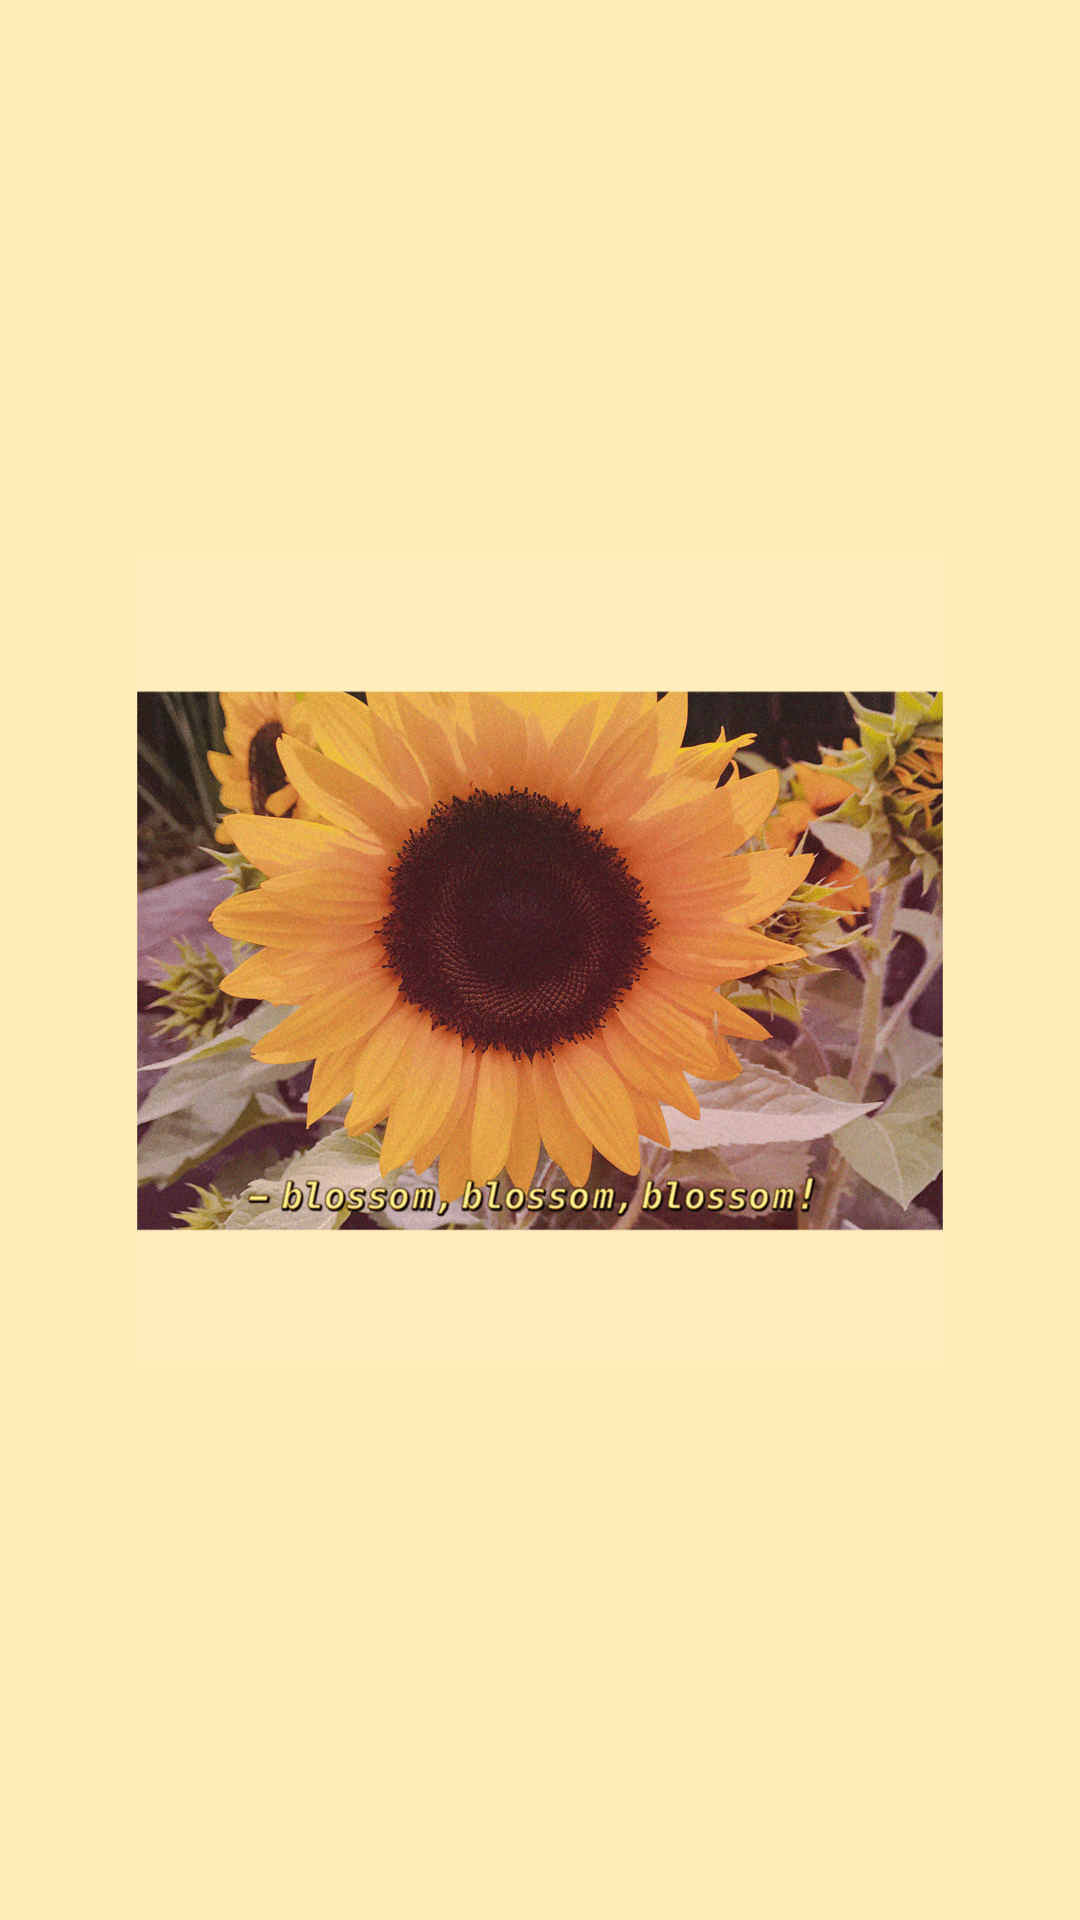 A sunflower with the caption 